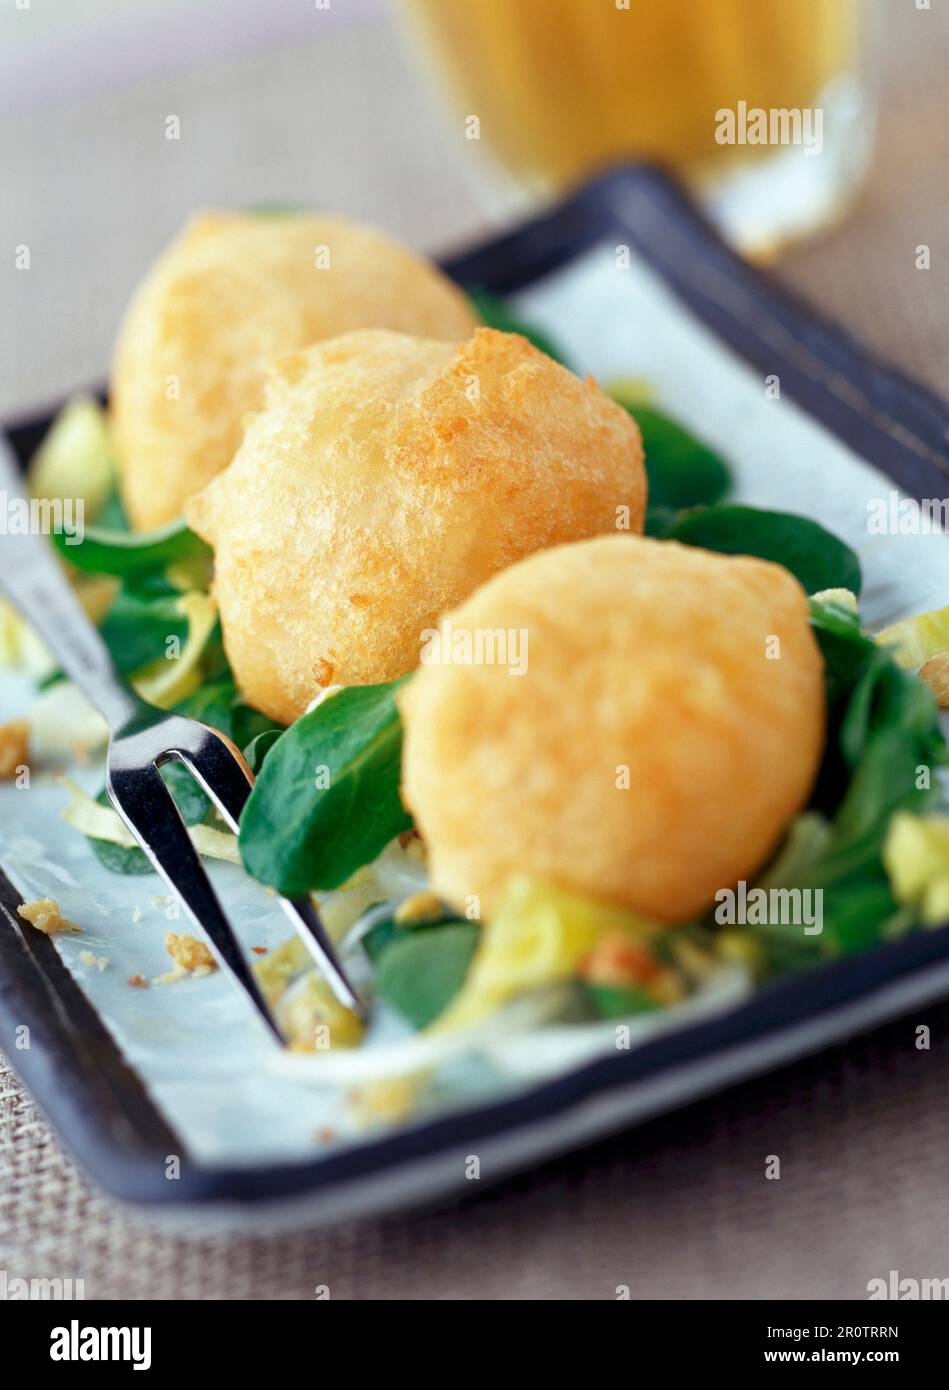 Maroilles cheese fritters Stock Photo